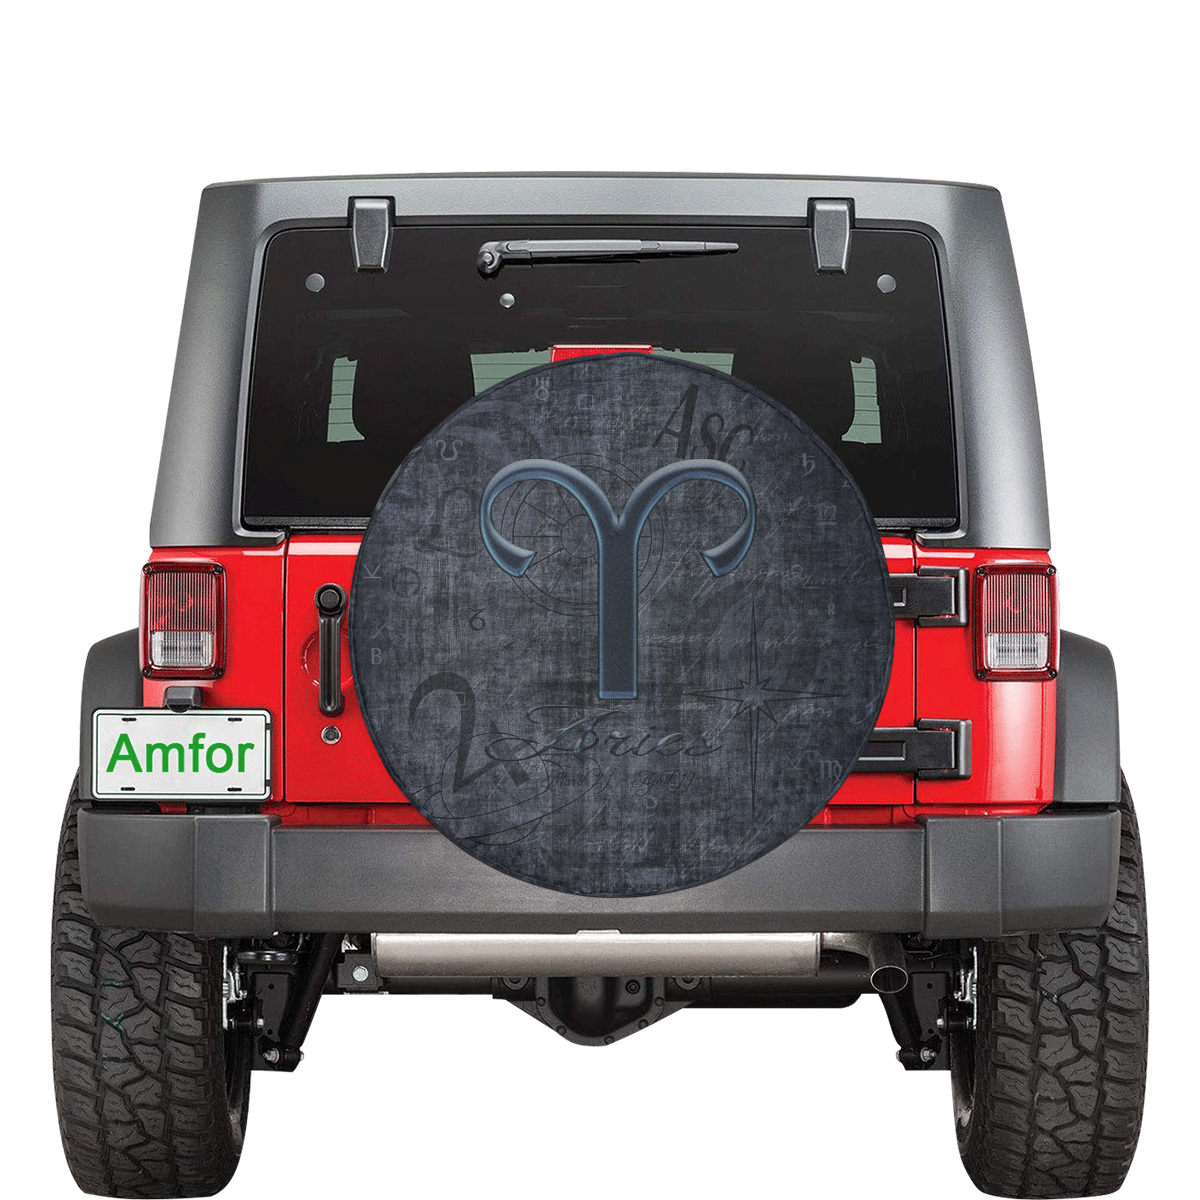 Astrology Zodiac Sign Aries in Grunge Style 34 Inch Spare Tire Cover